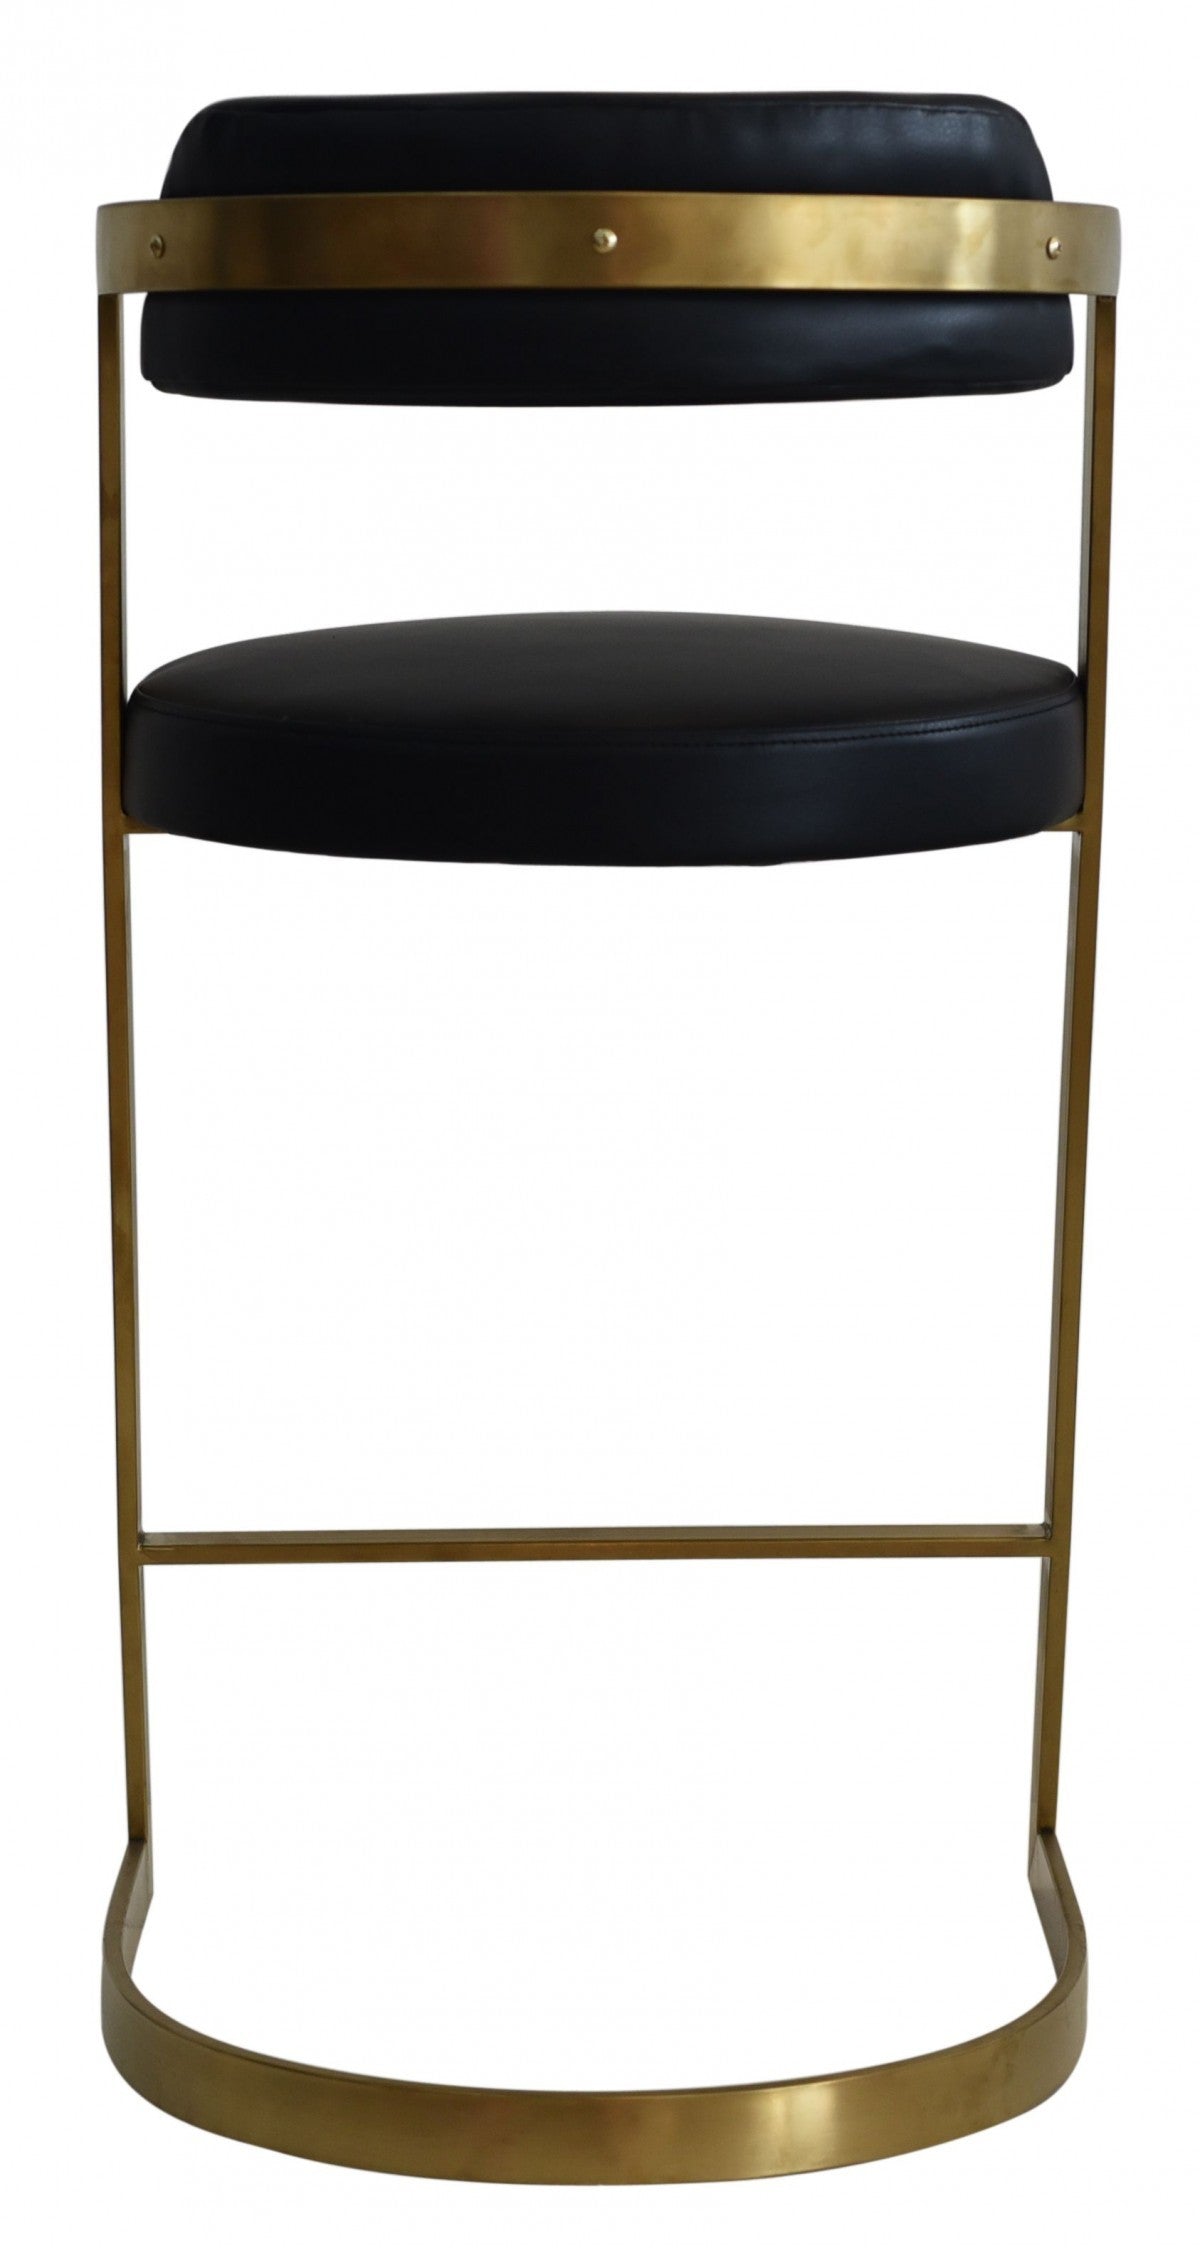 36" Black And Gold Faux Leather And Stainless Steel Low Back Counter Height Bar Chair With Footrest By Homeroots